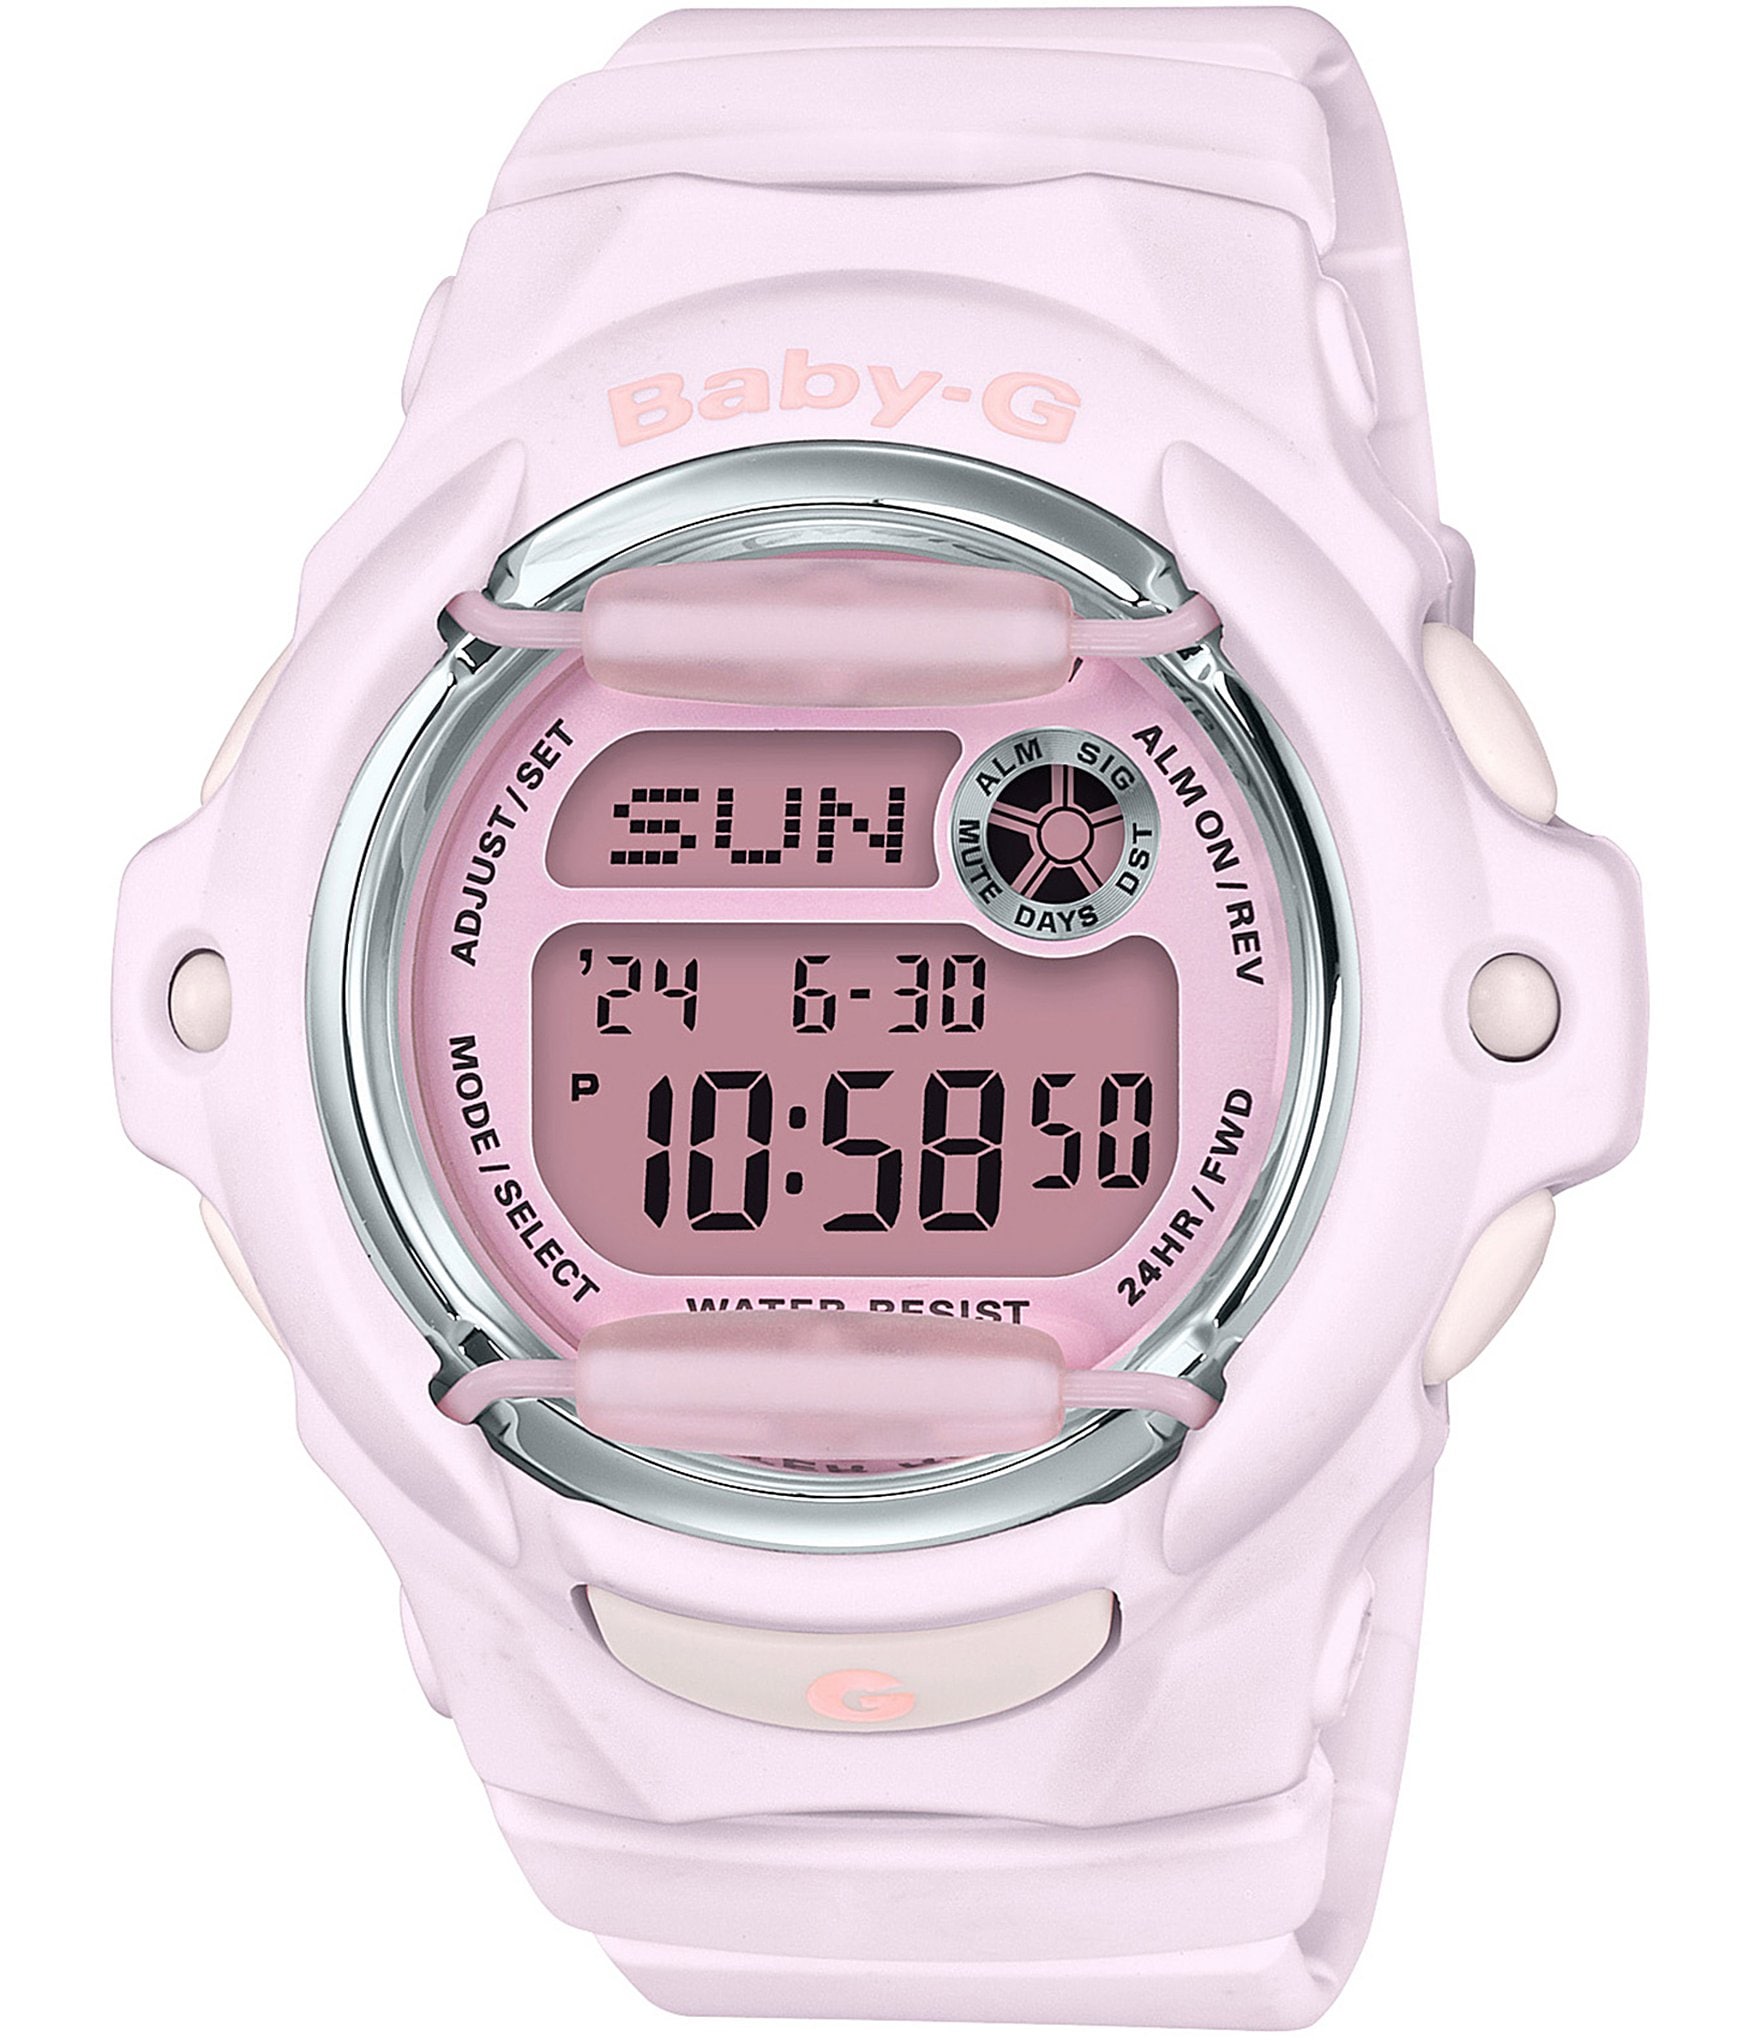 are baby g shock watches waterproof